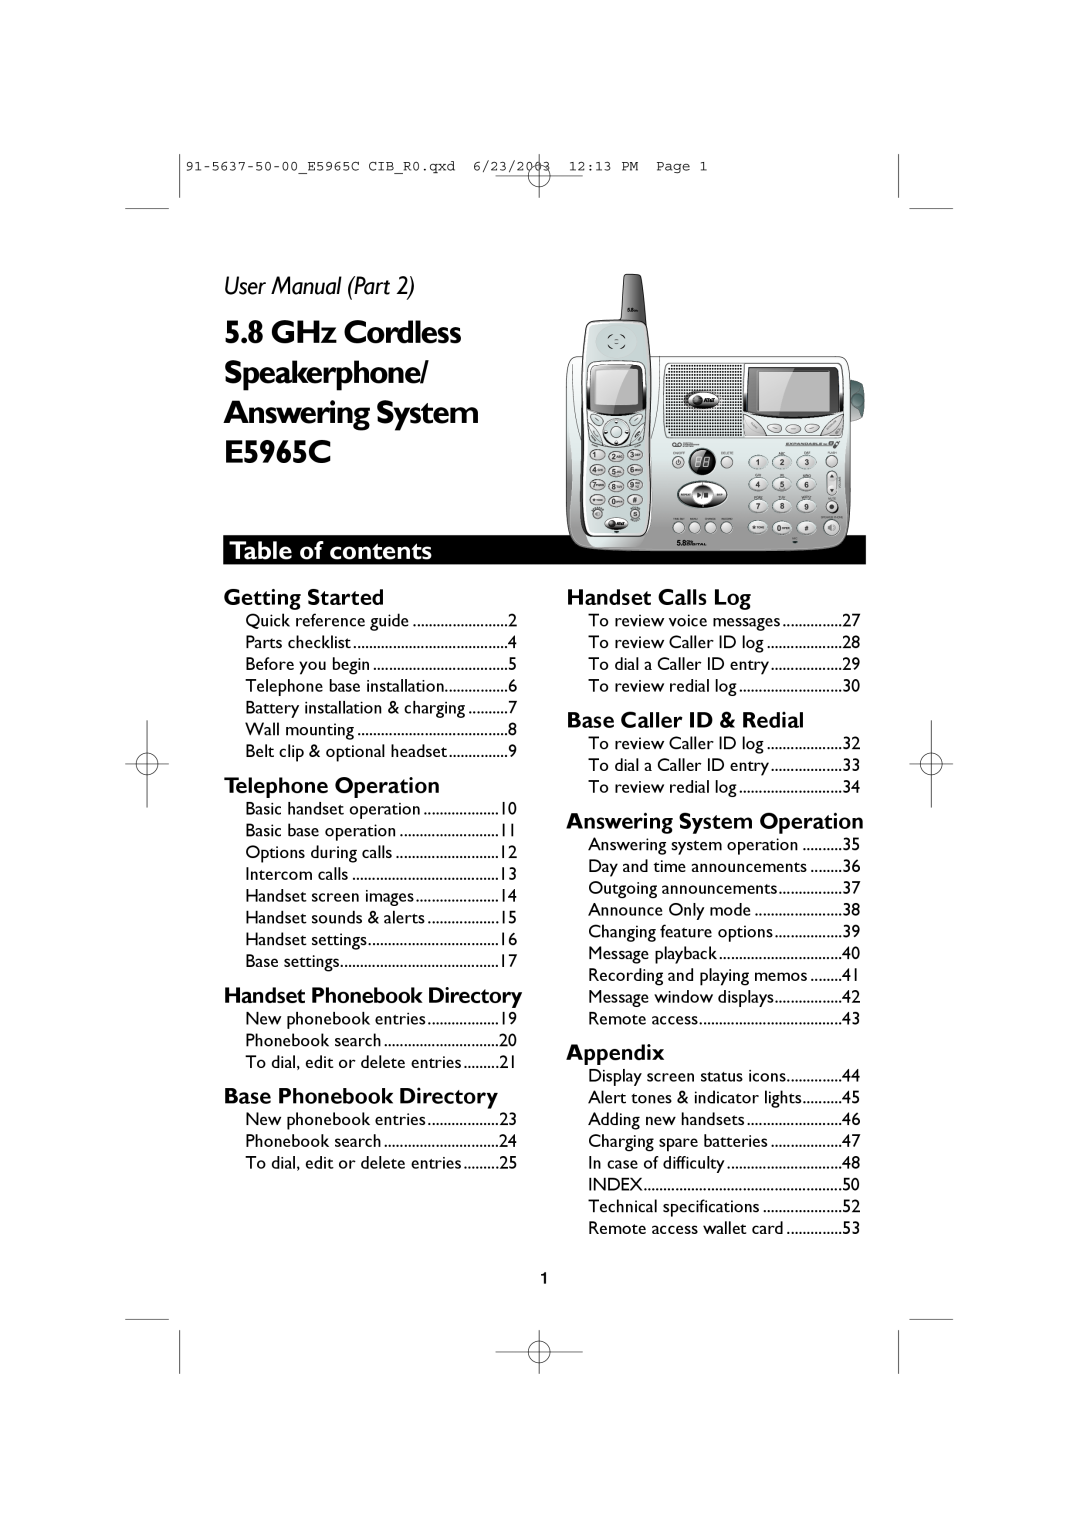 AT&T Table of contents, GHz Cordless Speakerphone/ Answering System E5965C, User Manual Part, Getting Started, Appendix 